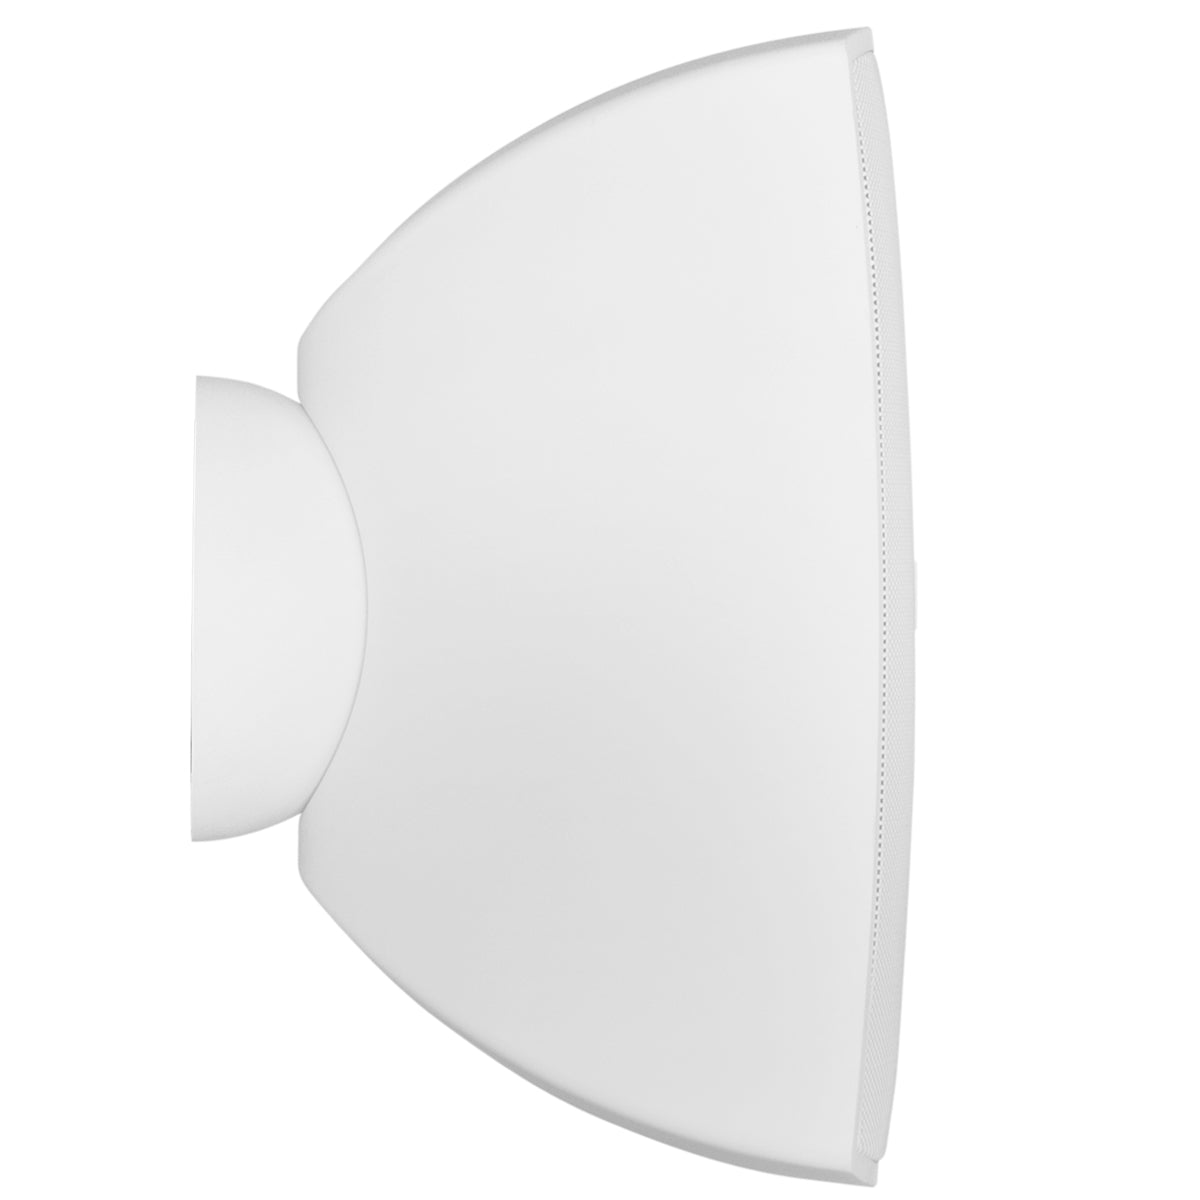 Audac ATEO6D Wall speaker with CleverMount 6" White version - 16ohm